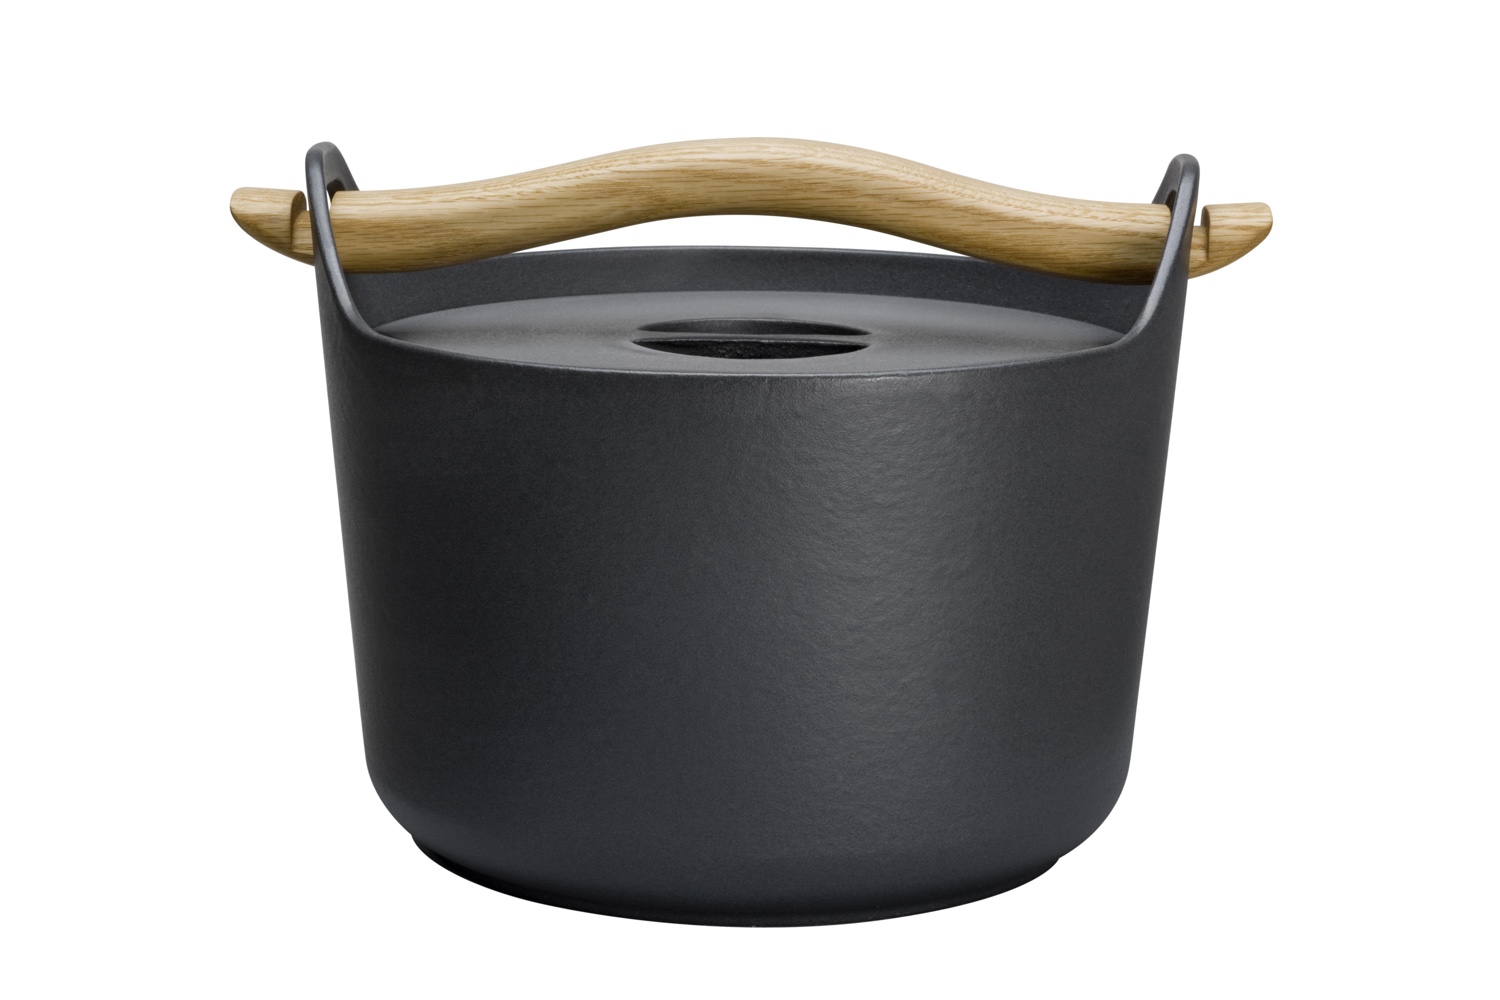 The Sarpaneva Cast iron pot, designed by Timo Sarpaneva in 1960, is a functional Finnish design classic.